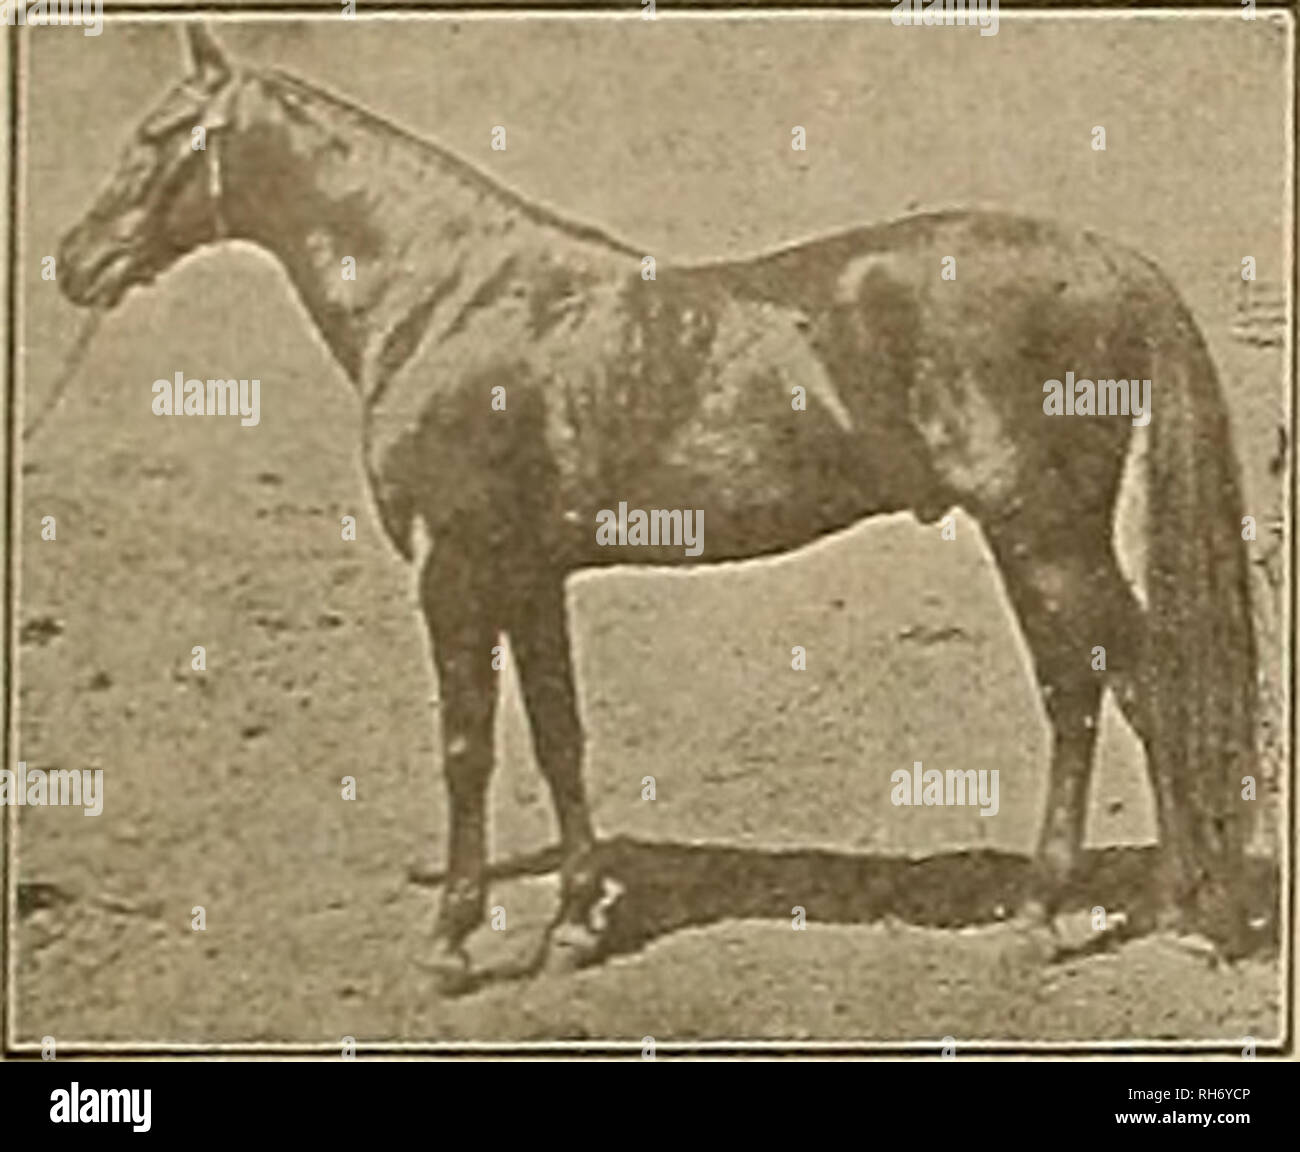 . Breeder and sportsman. Horses. 18 ®he gveeirev attif ^pcxtsmaix fMAY 13, 1905 MENDOCINO 22607 KECOKD (THREE-YEAR-OLD) 2:19« Urea ax I-aiu nnu o uto i-tim. Sire ELFCTIONEBR IS6, son of Hambletonian 10. First dam, '2-19H Electant2:l94, Morocco (3y o trial) 2:22) by Piedmont £ (dam of Mamie W. (3) 2:l?!i. Hyperion 2:21^, Memento 2:25M. NUTWOOD WILKES 2:16 Sire of Monto Carlo S:07MCtowagoa2:0fii$); Idoltta (8y. o.) 2:21*. (3y.o)2:12, (a) 8:09*, etc. Bay Stallion. 15 34 hands; weight 1190 pounds; hind feet and ankles white; foaled April 3-1,1889- Bred at Palo Alto S oek Farm. First dam, IVf ANO ( Stock Photo